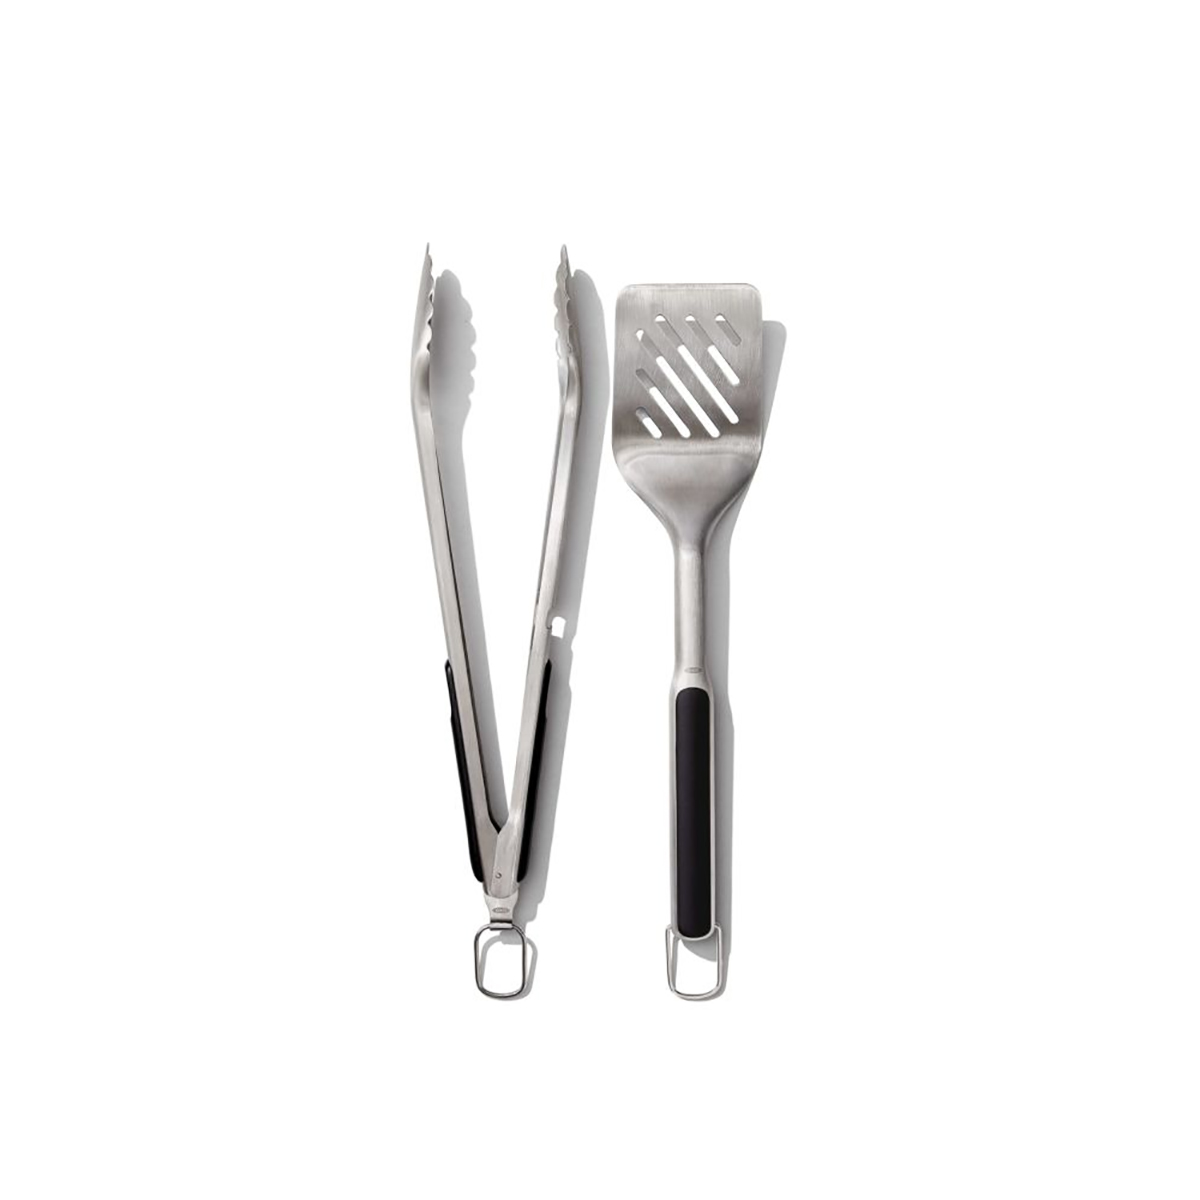 OXO Good Grips(R) Grilling Turner & Tong Set